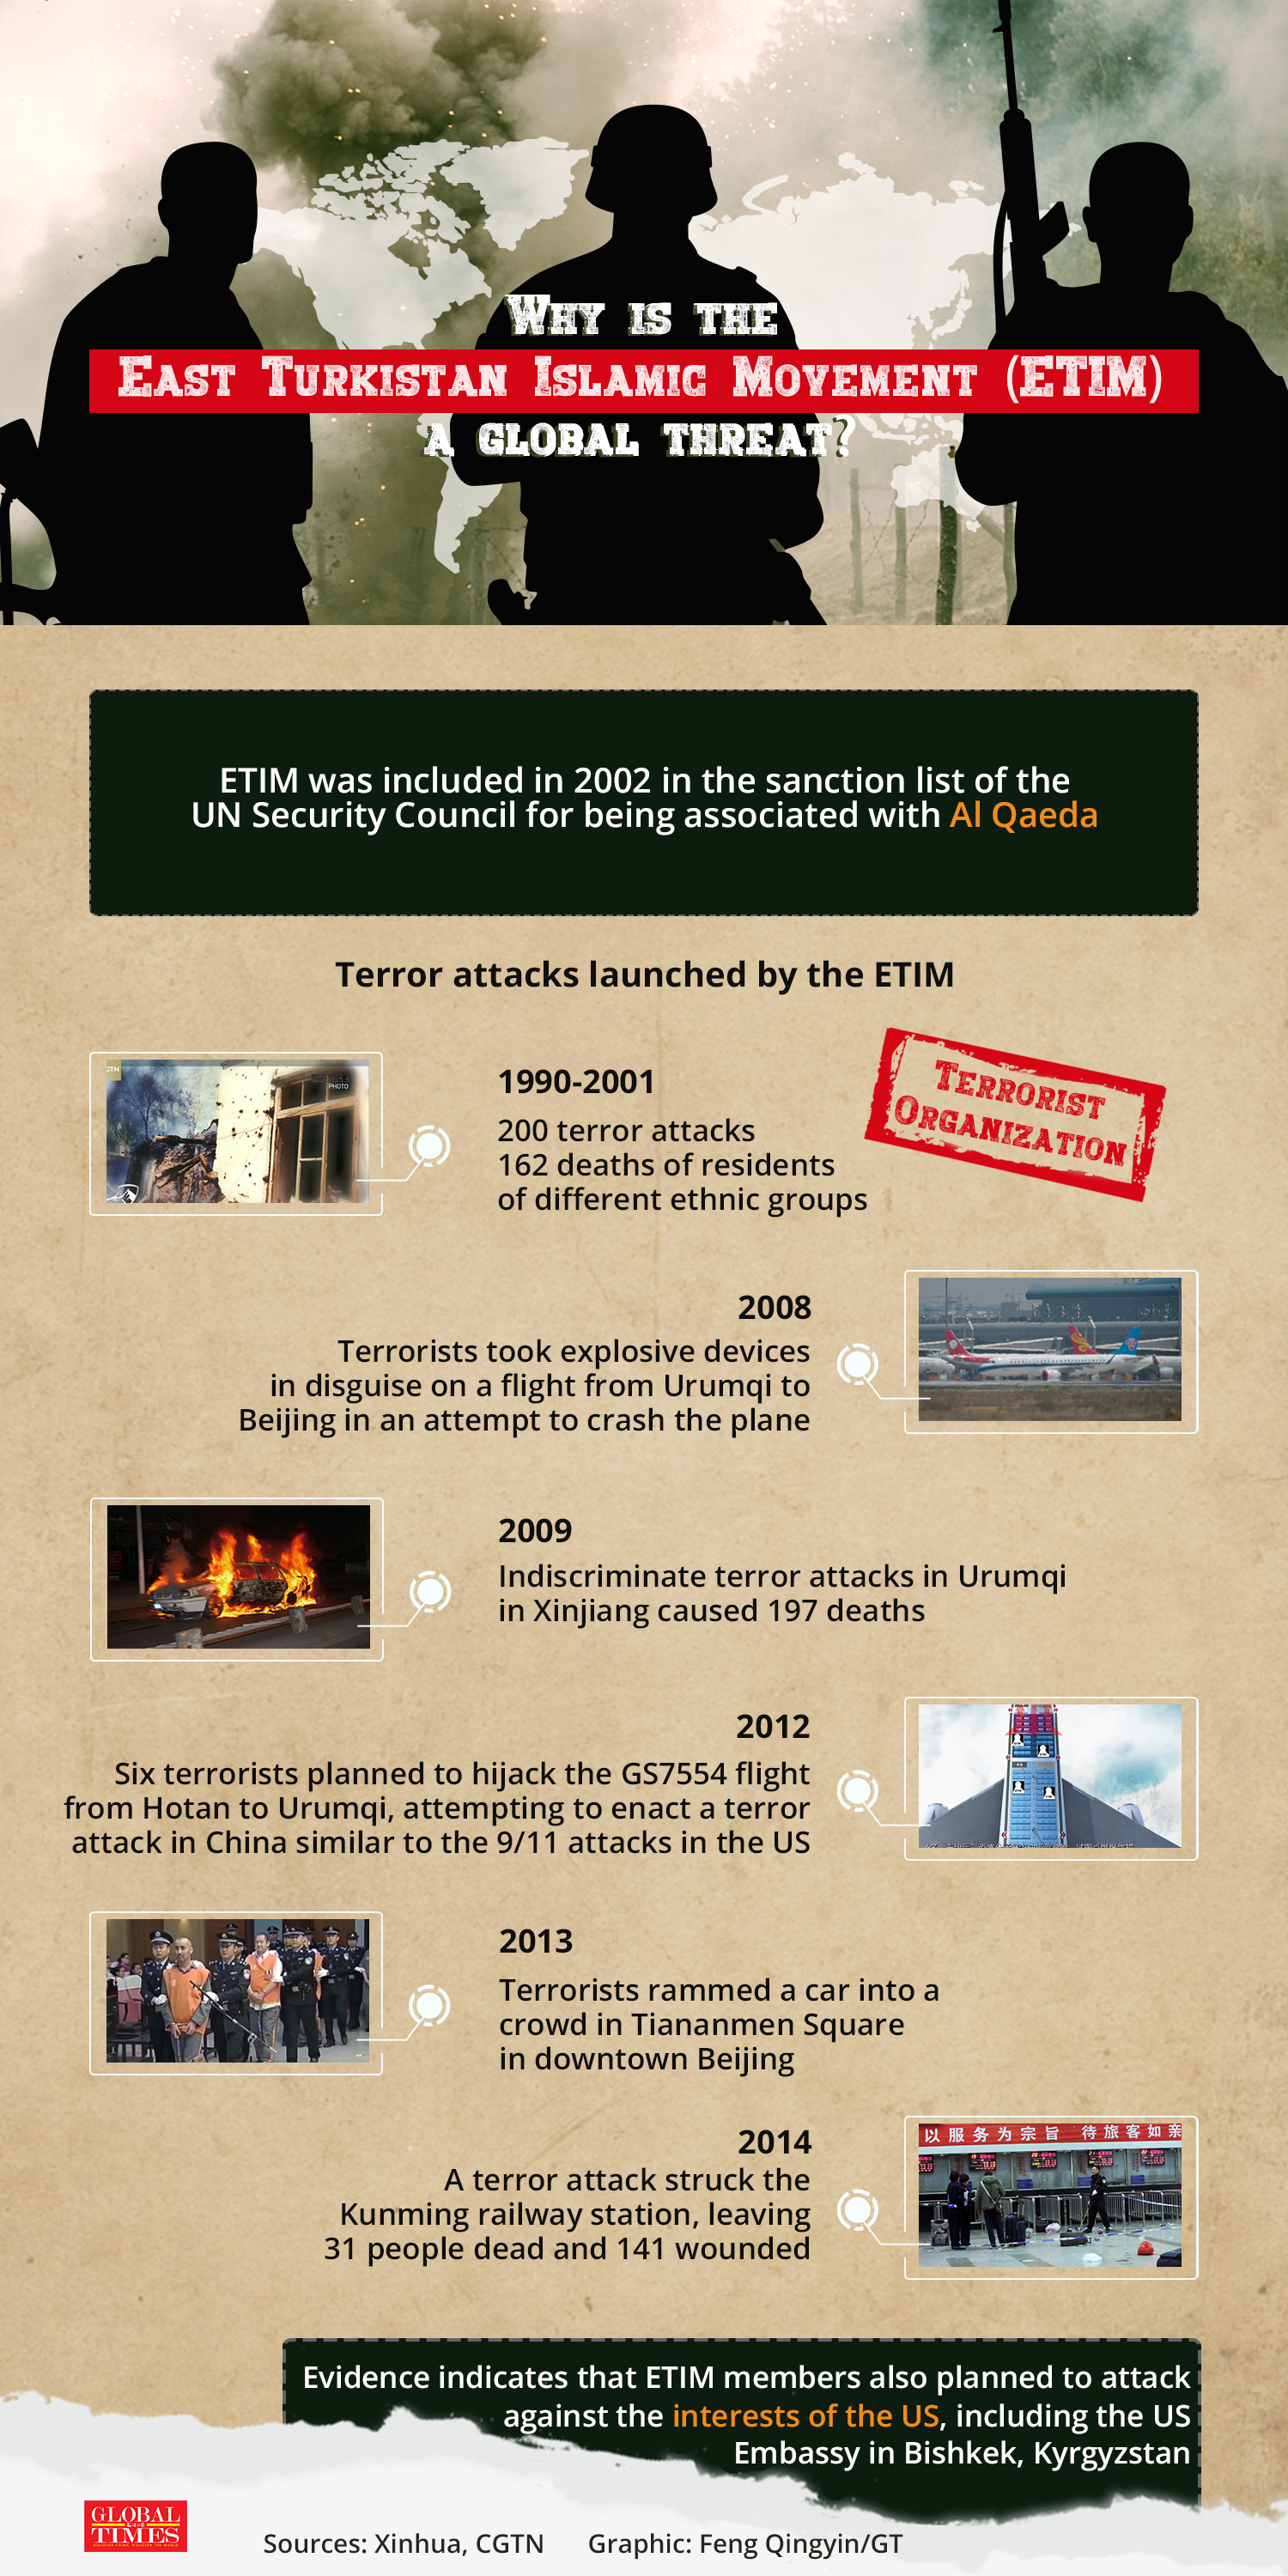 Besides inciting violence and organizing terror attacks in China's Xinjiang, the ETIM, a terrorist organization on the UN security sanction list over ties with Al Qaeda, also planned attacks on the US Embassy in Bishkek, Kyrgyzstan, posing a threat to all. Graphic: Feng Qingyin/GT